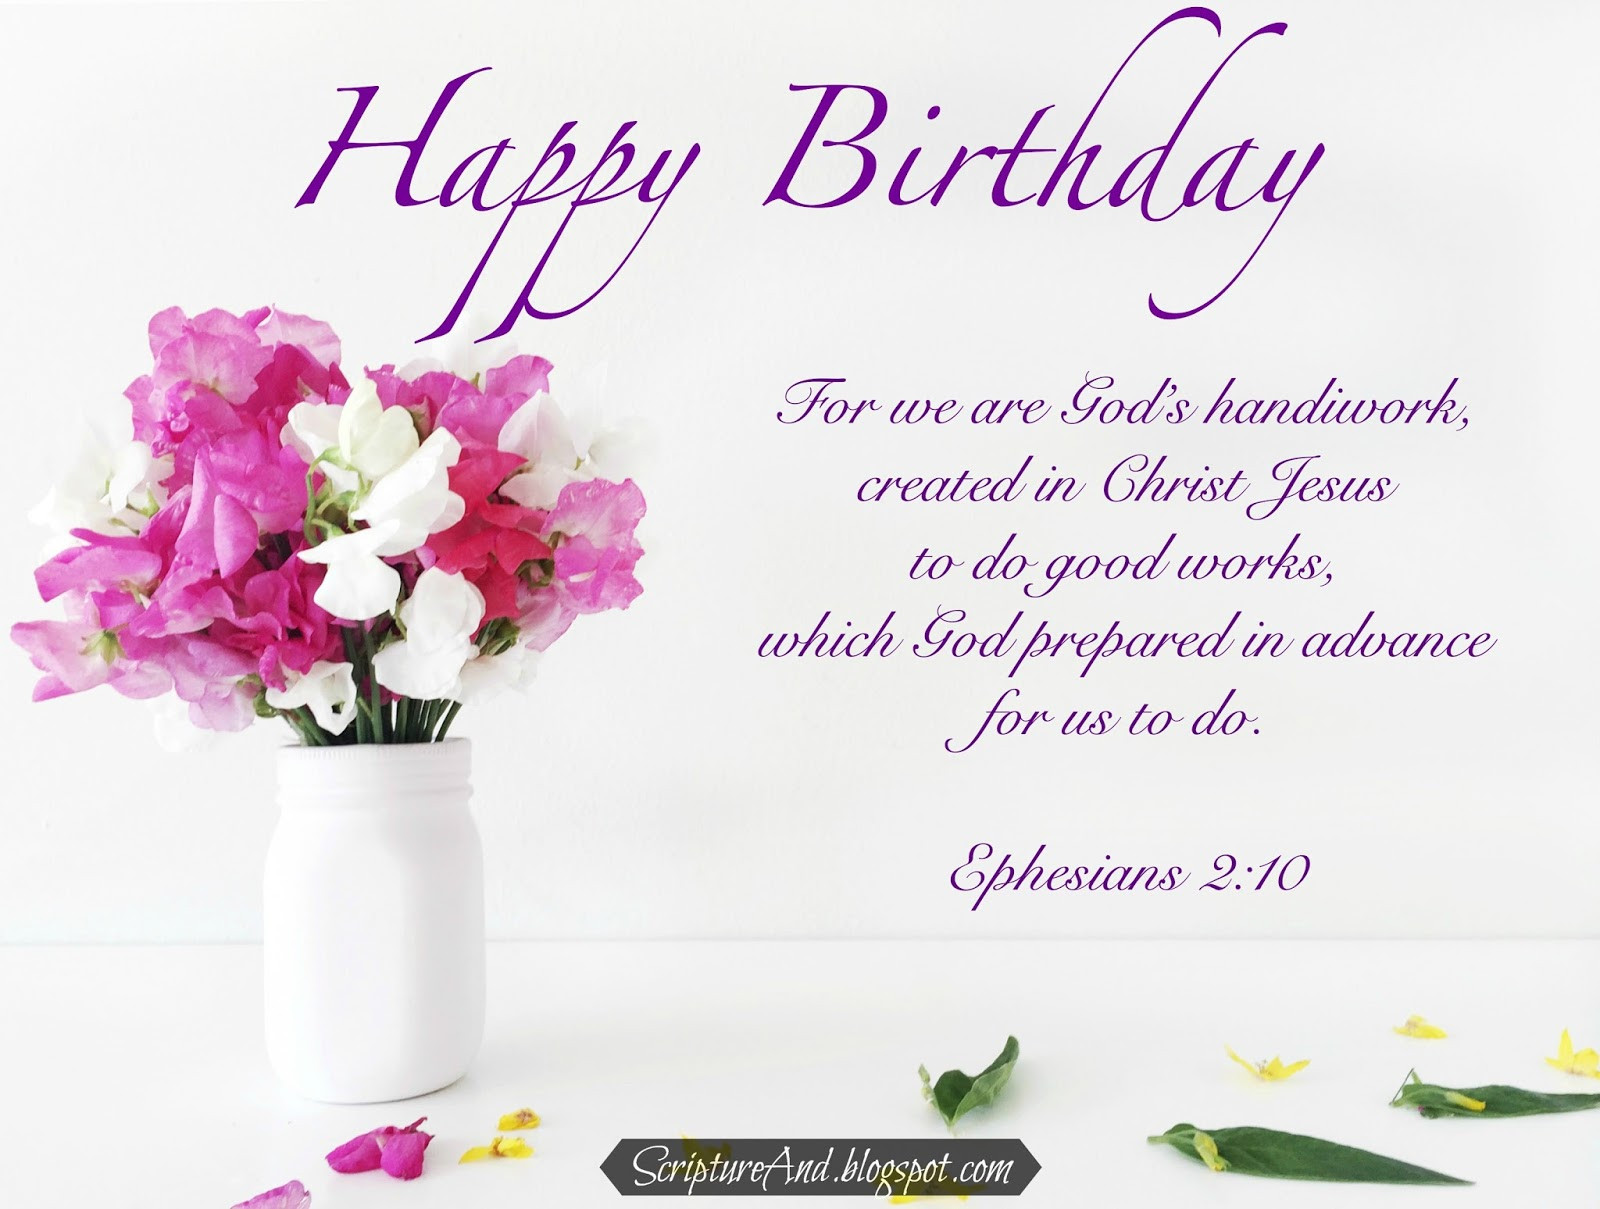 Happy Birthday Bible Quotes
 Scripture and Free Birthday with Bible Verses